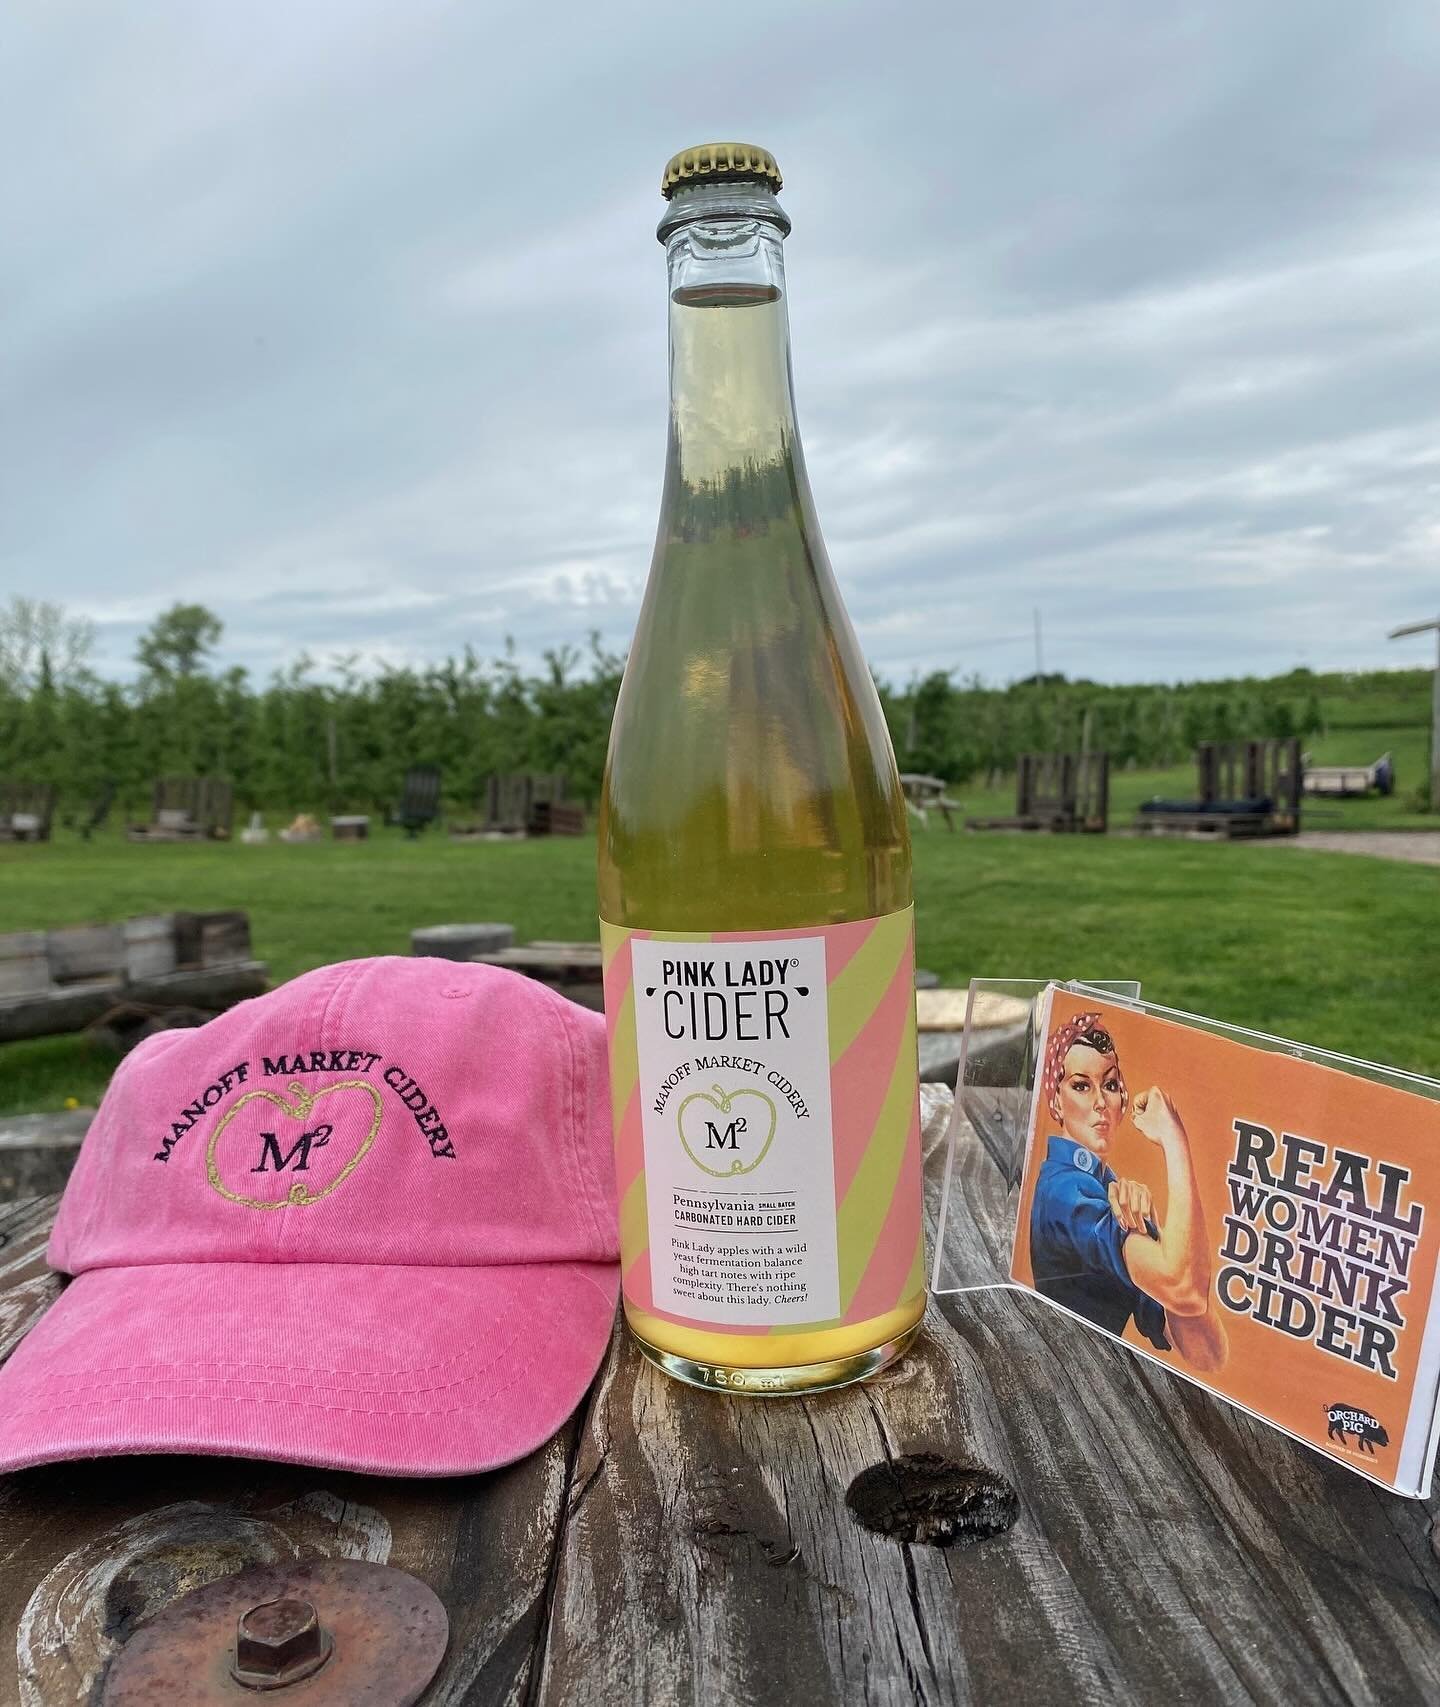 Treat your favorite lady (*mom*) to a Cidery afternoon this Saturday.  Split a bottle together in our orchard seating area.  Fire pits will be going.  Cheers 💐 🥂!